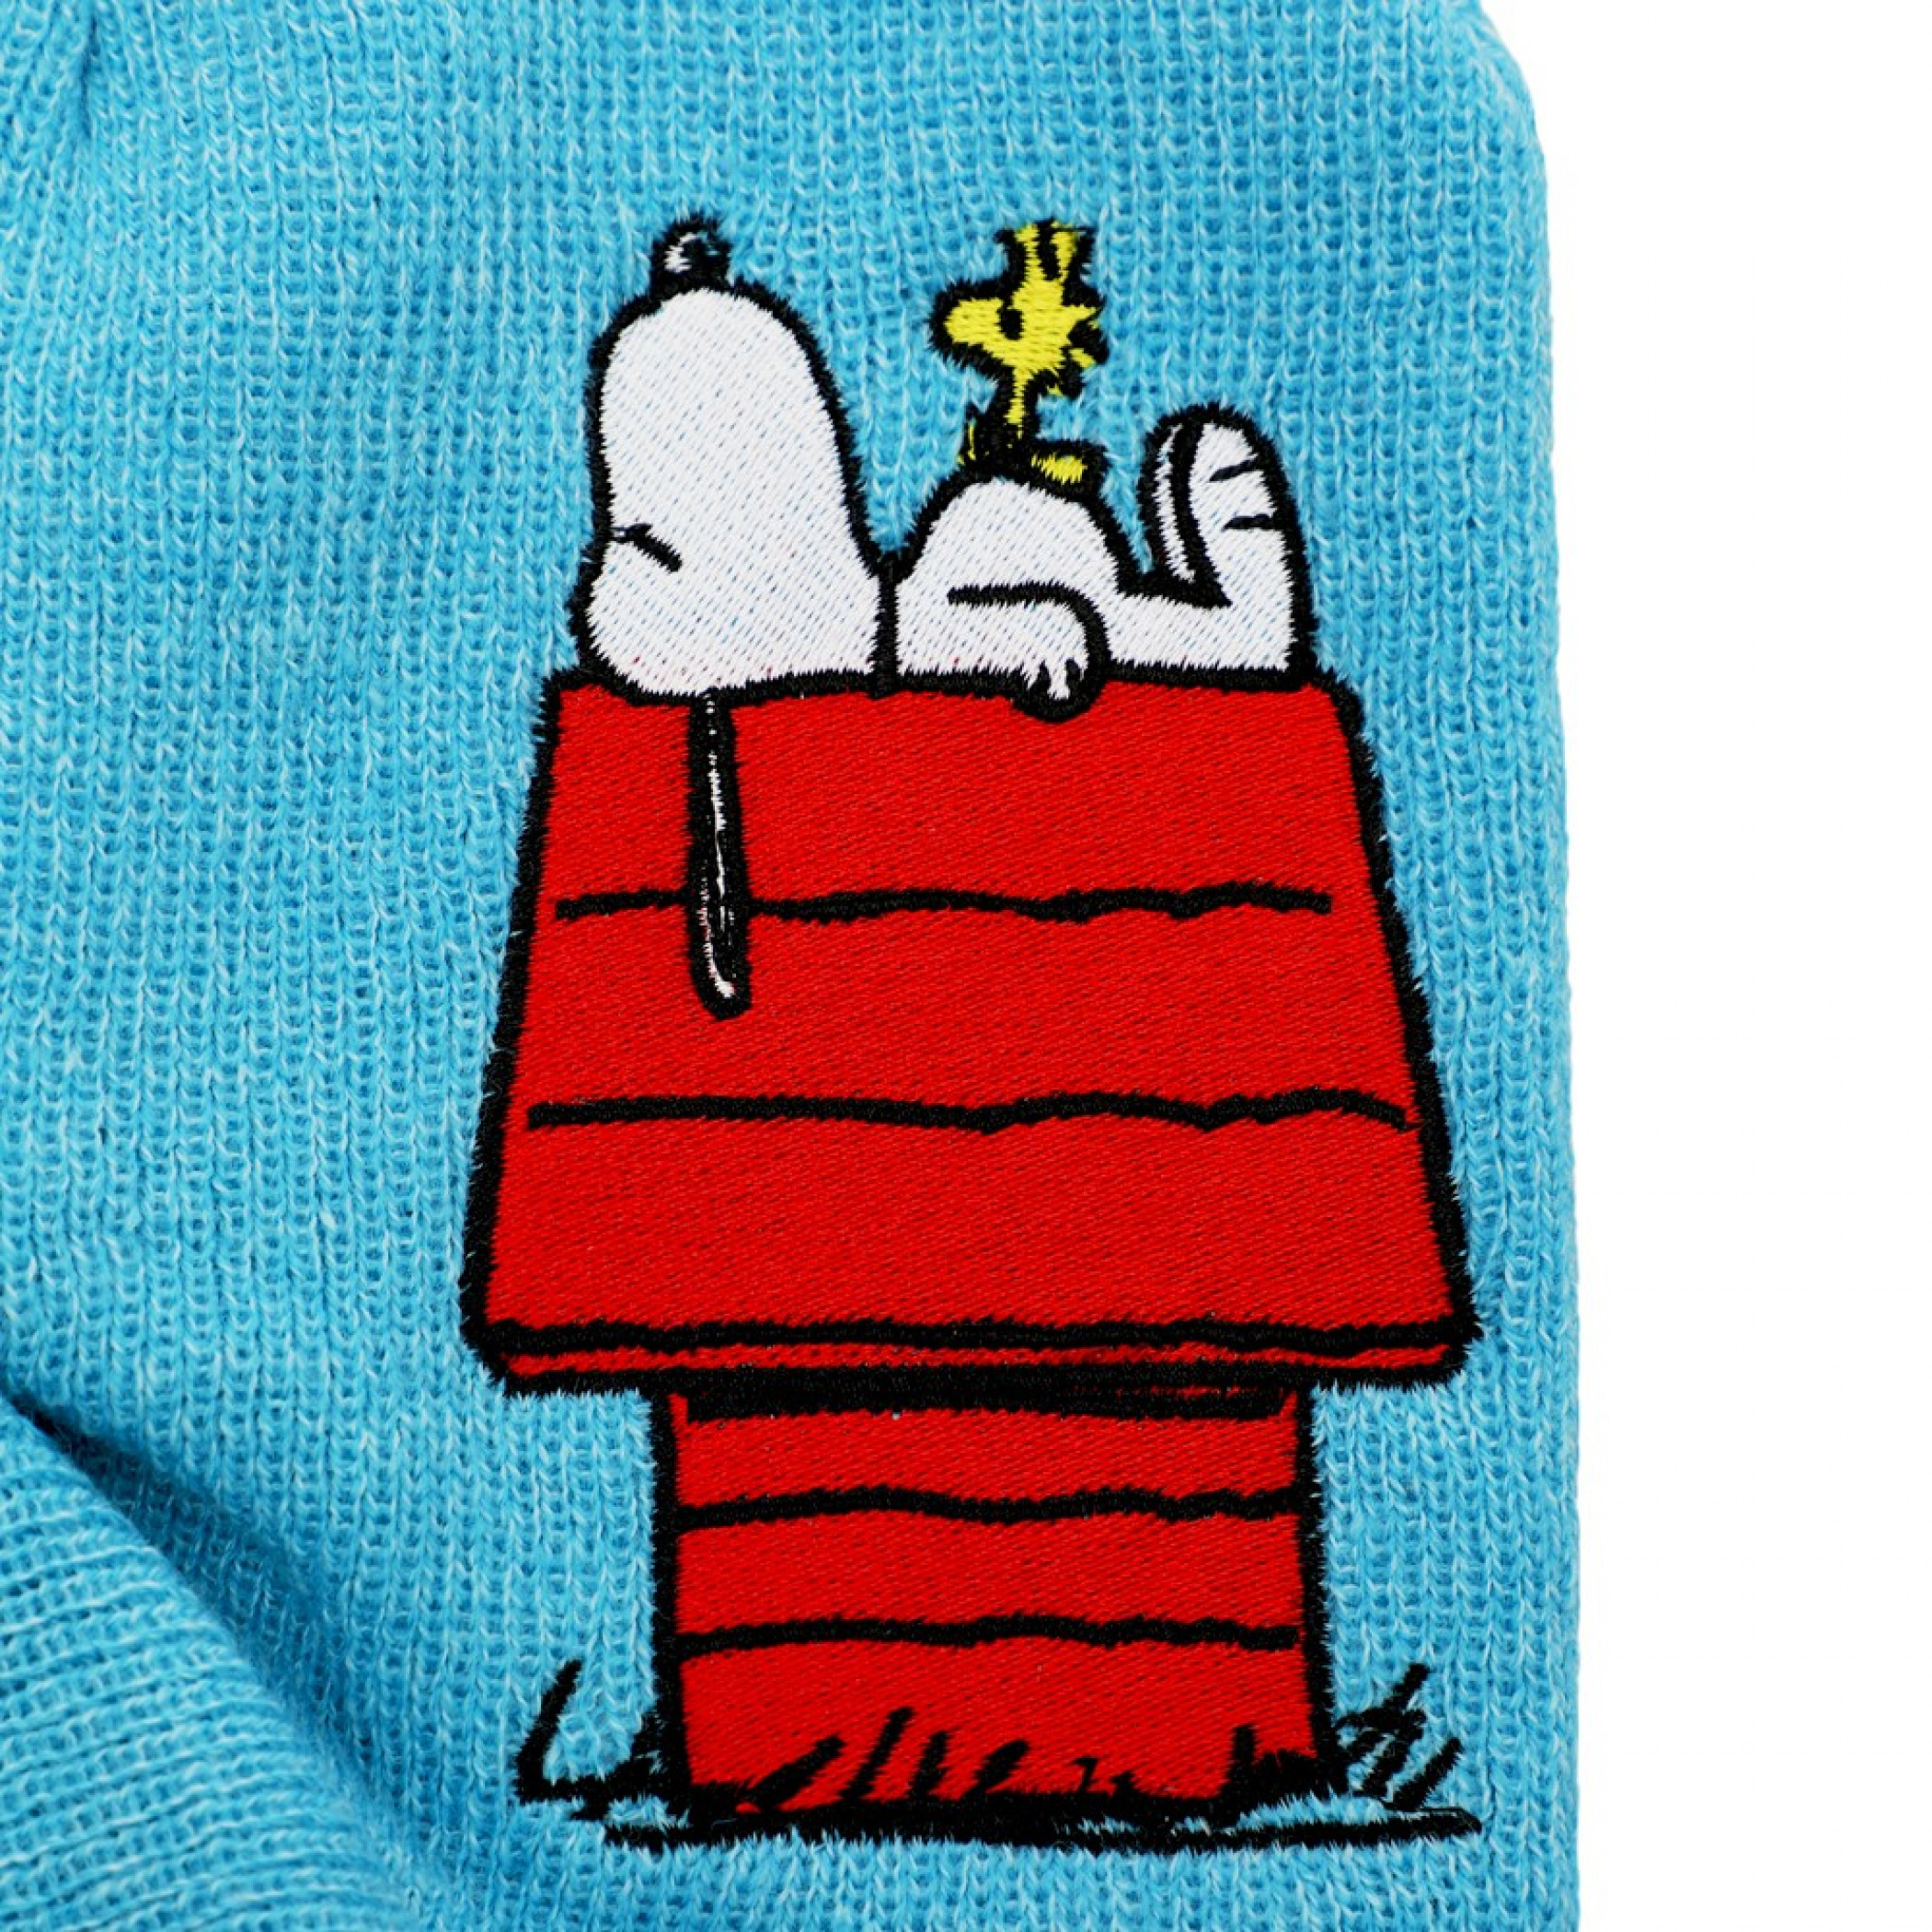 Bioworld Peanuts Snoopy and Woodstock Adult Blue Beanie